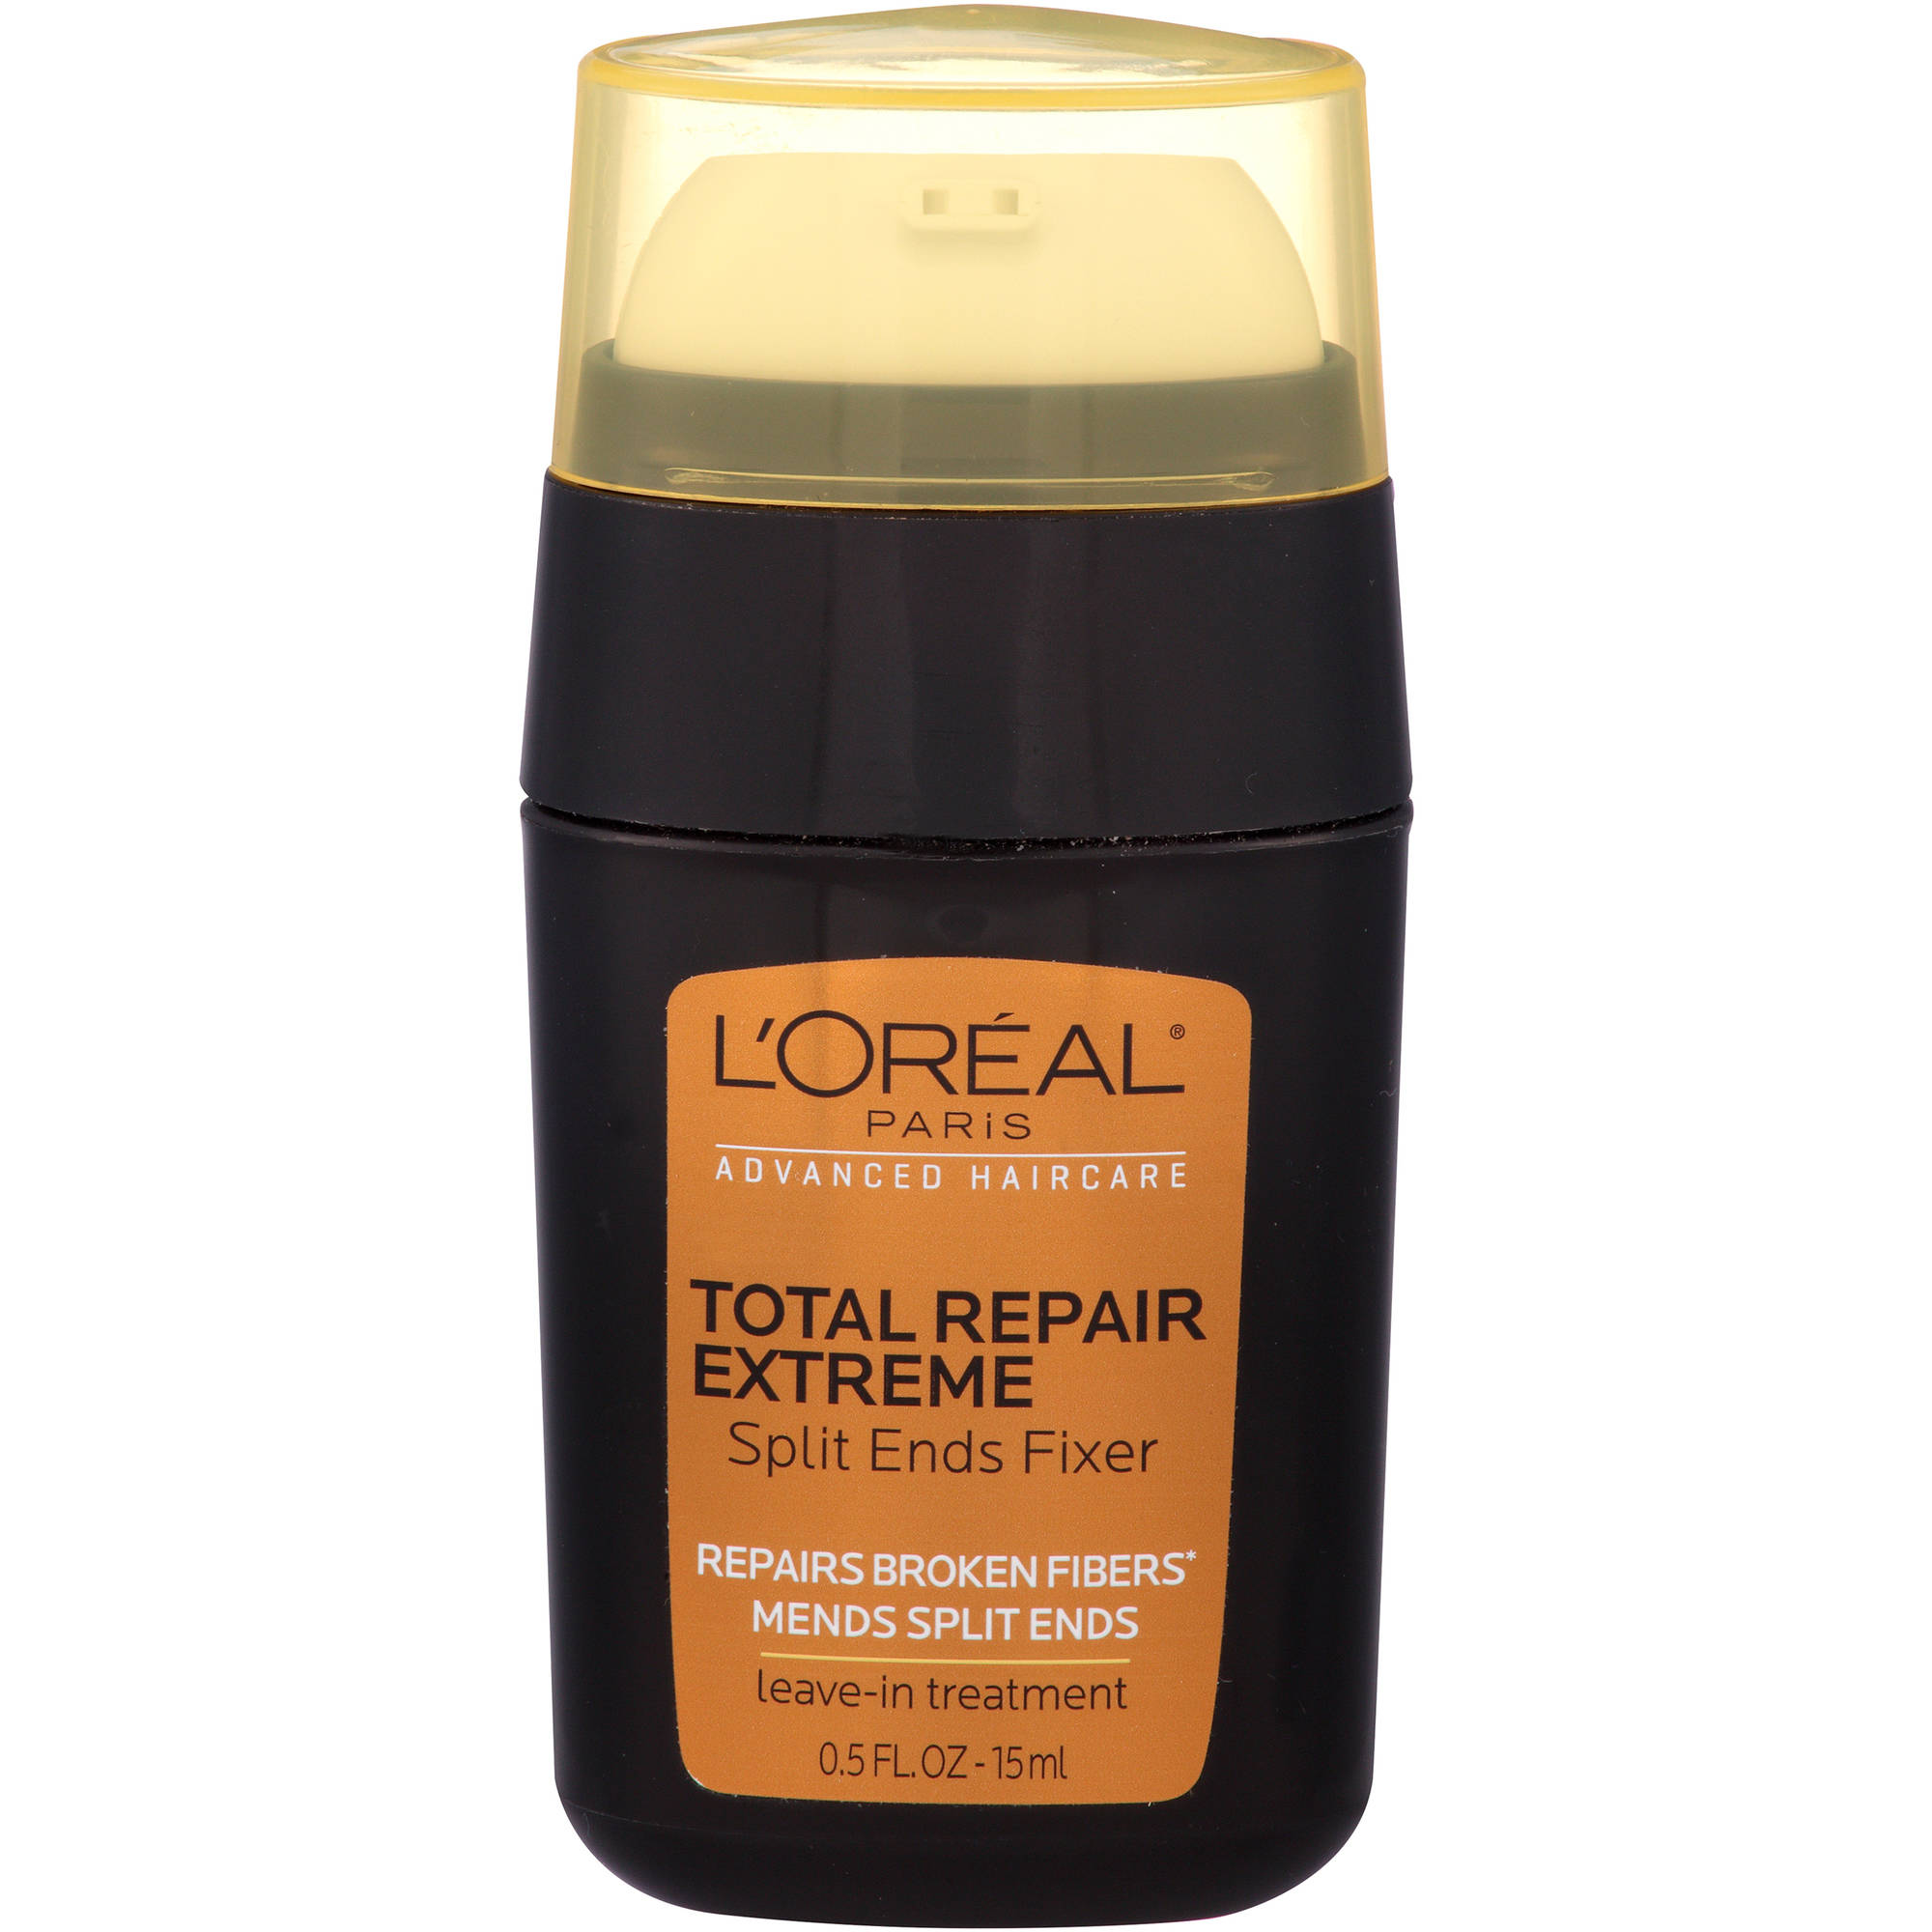 L'Oreal Advanced Haircare Total Repair Extreme Split Ends Fixer Leave-In Treatment 0.50 oz - image 4 of 5